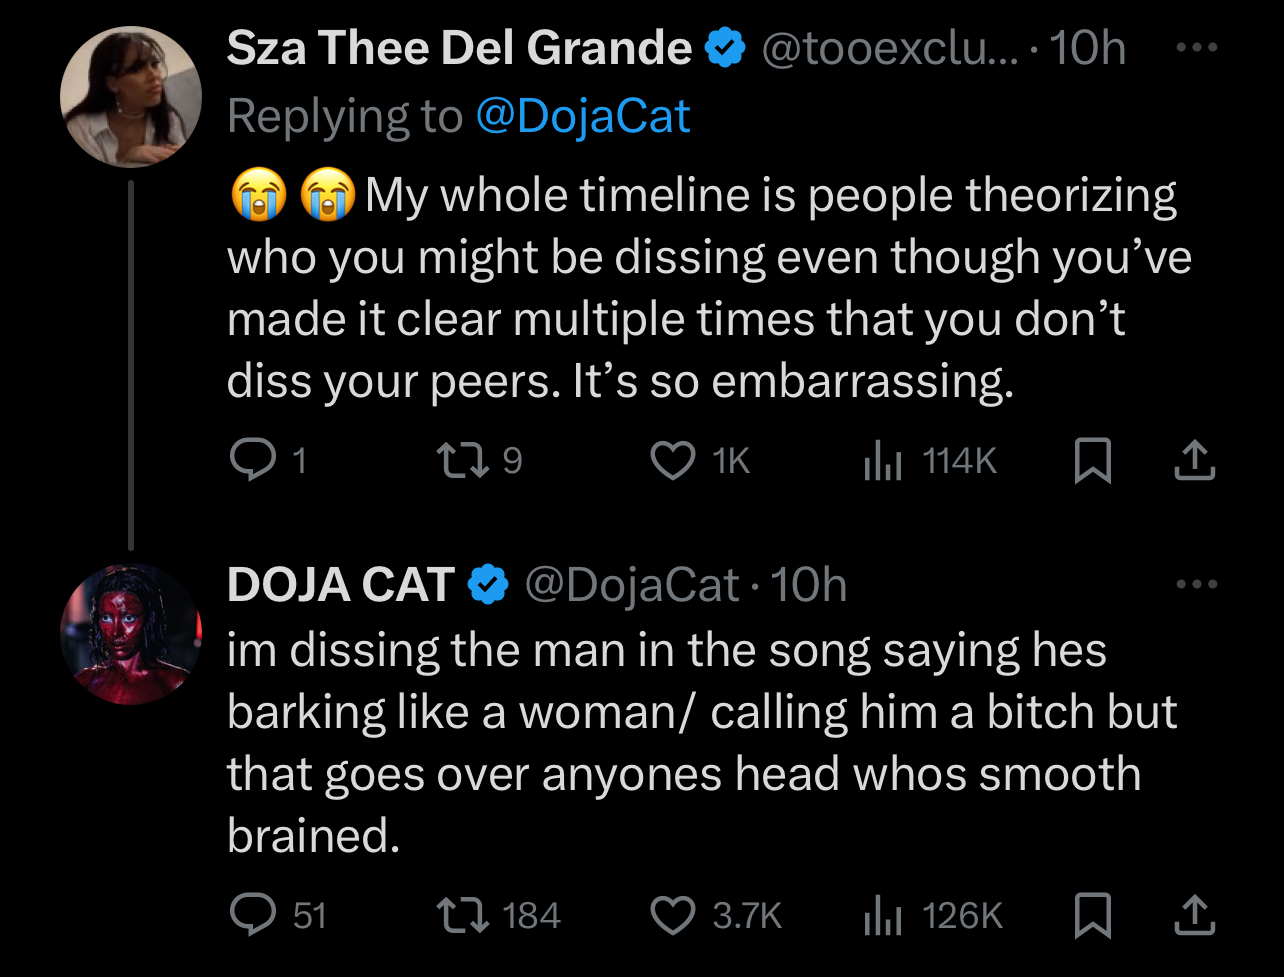 Two tweets, one from Sza Thee Del Grande and a response from Doja Cat discussing online comments